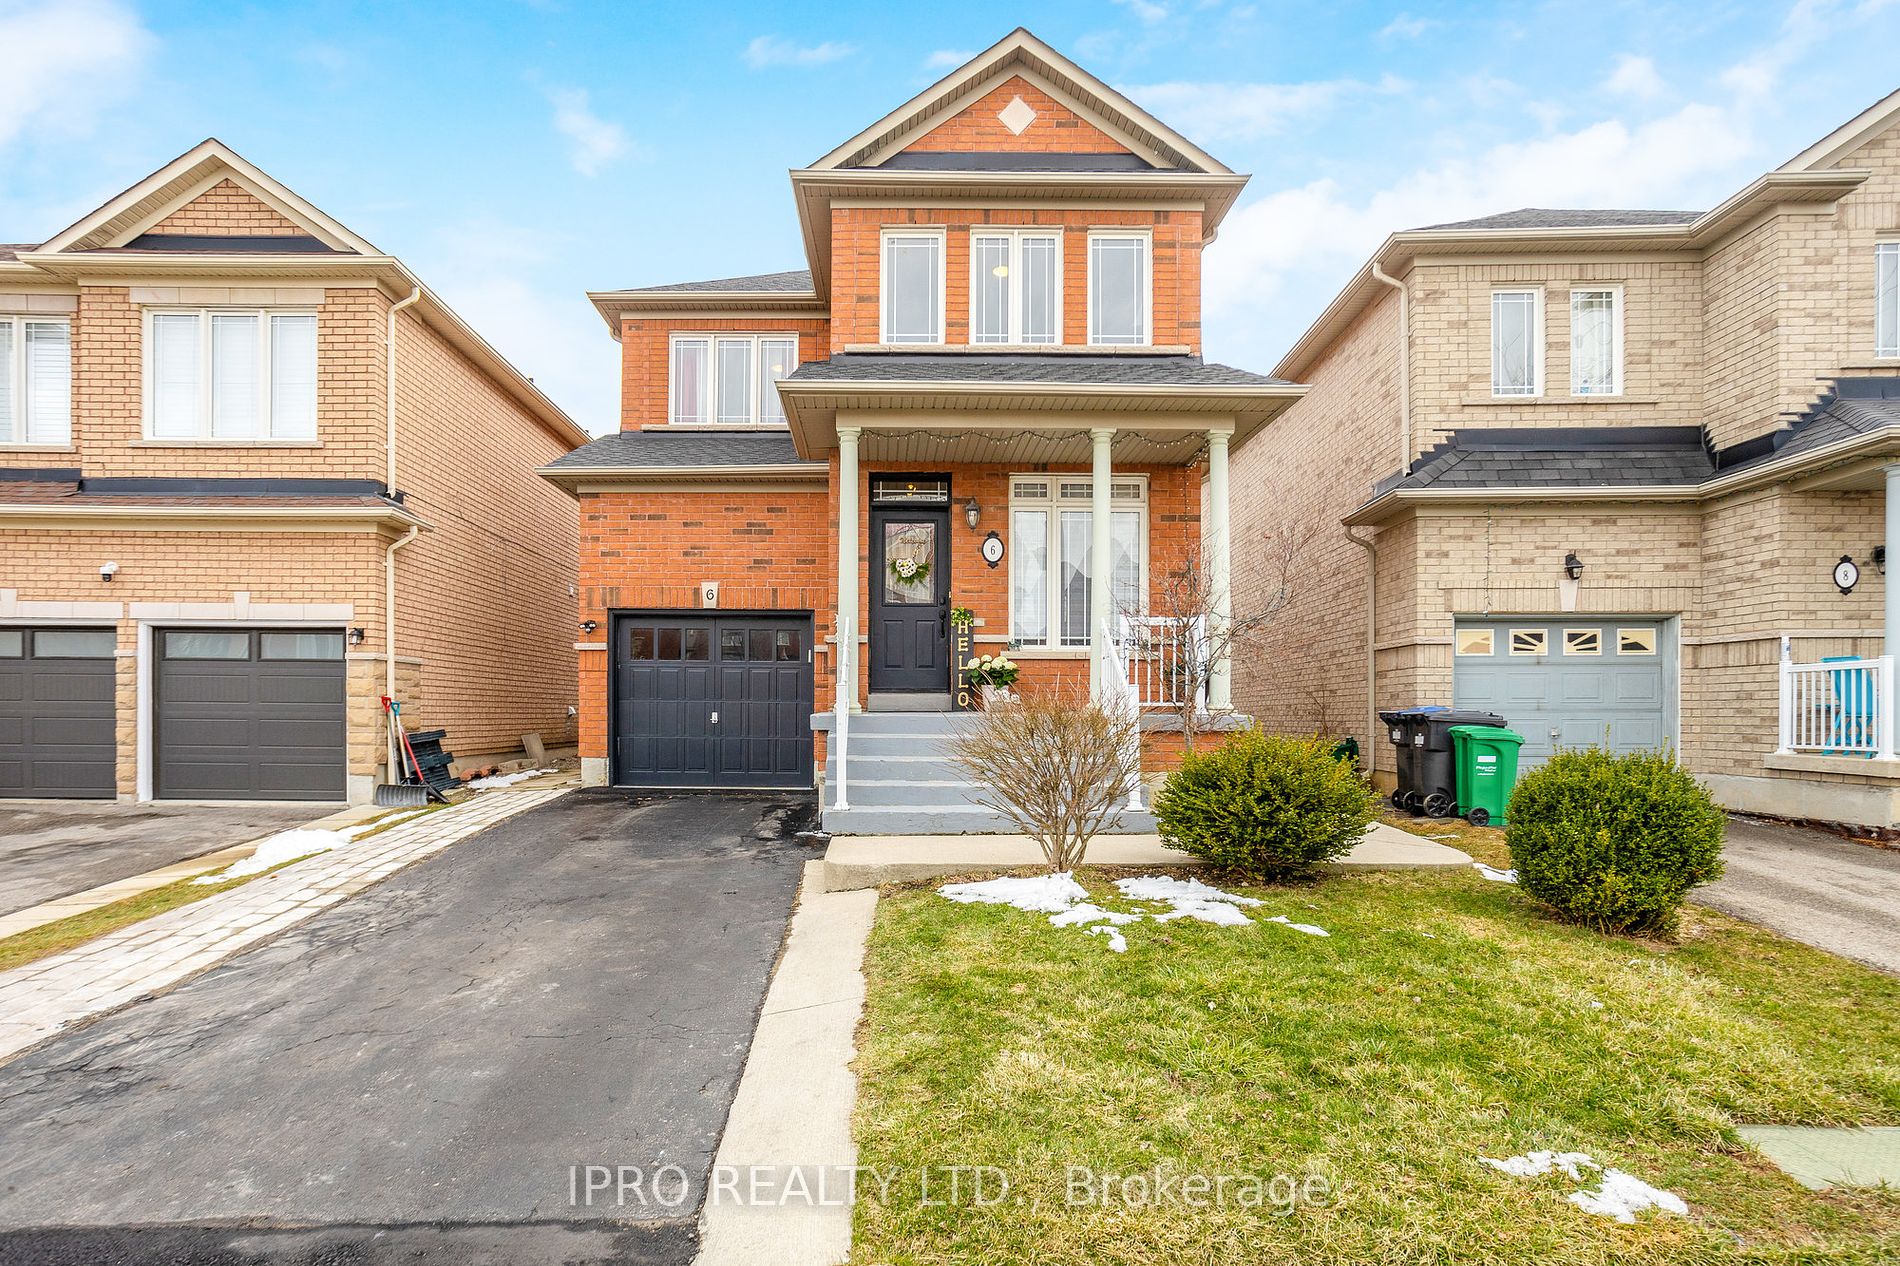 Detached house for sale at 6 Quance Gate Brampton Ontario